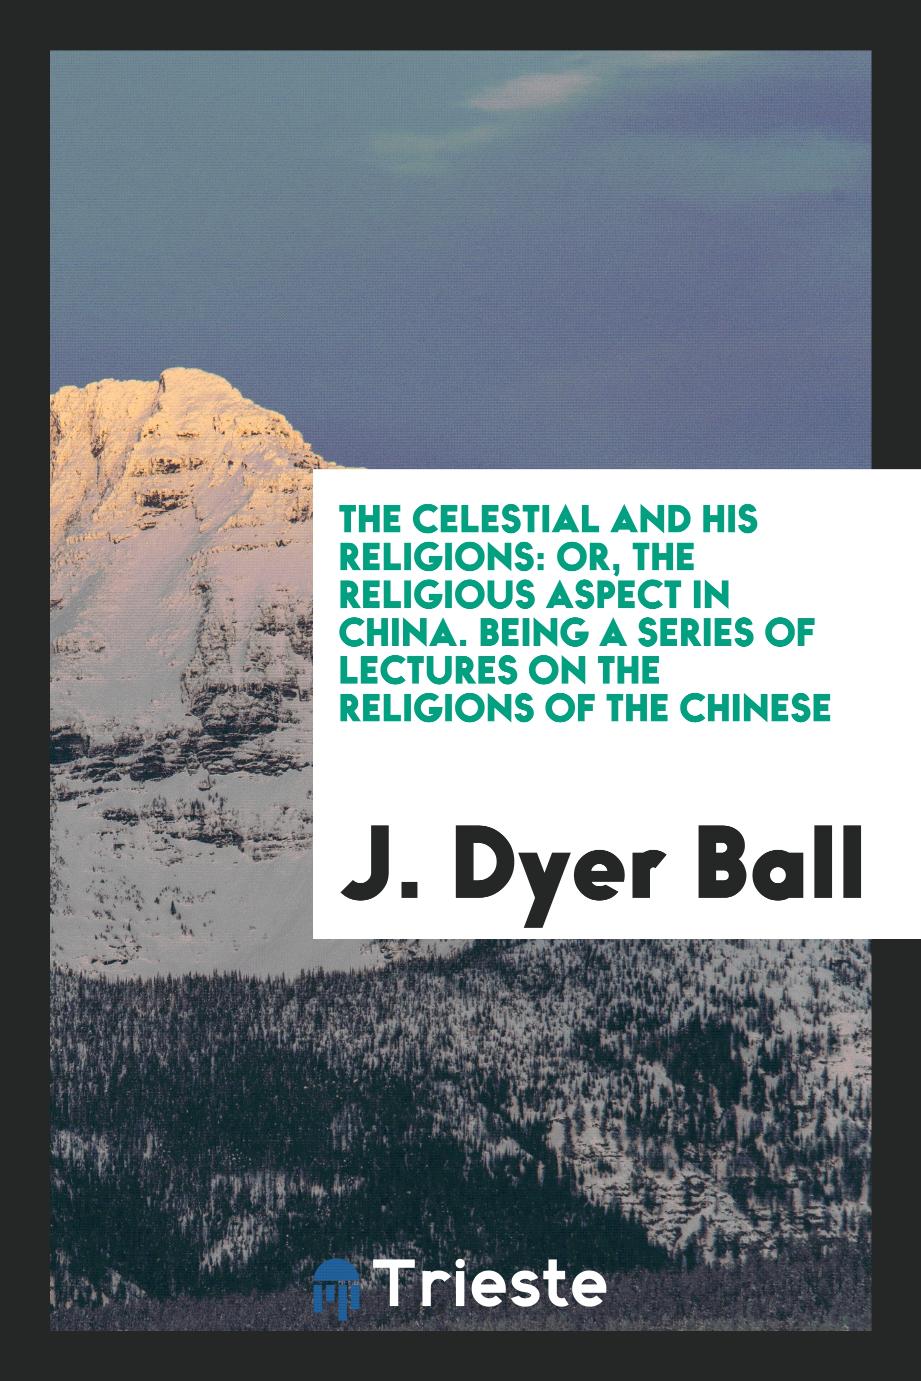 The Celestial and his religions: or, The religious aspect in China. Being a series of lectures on the religions of the Chinese